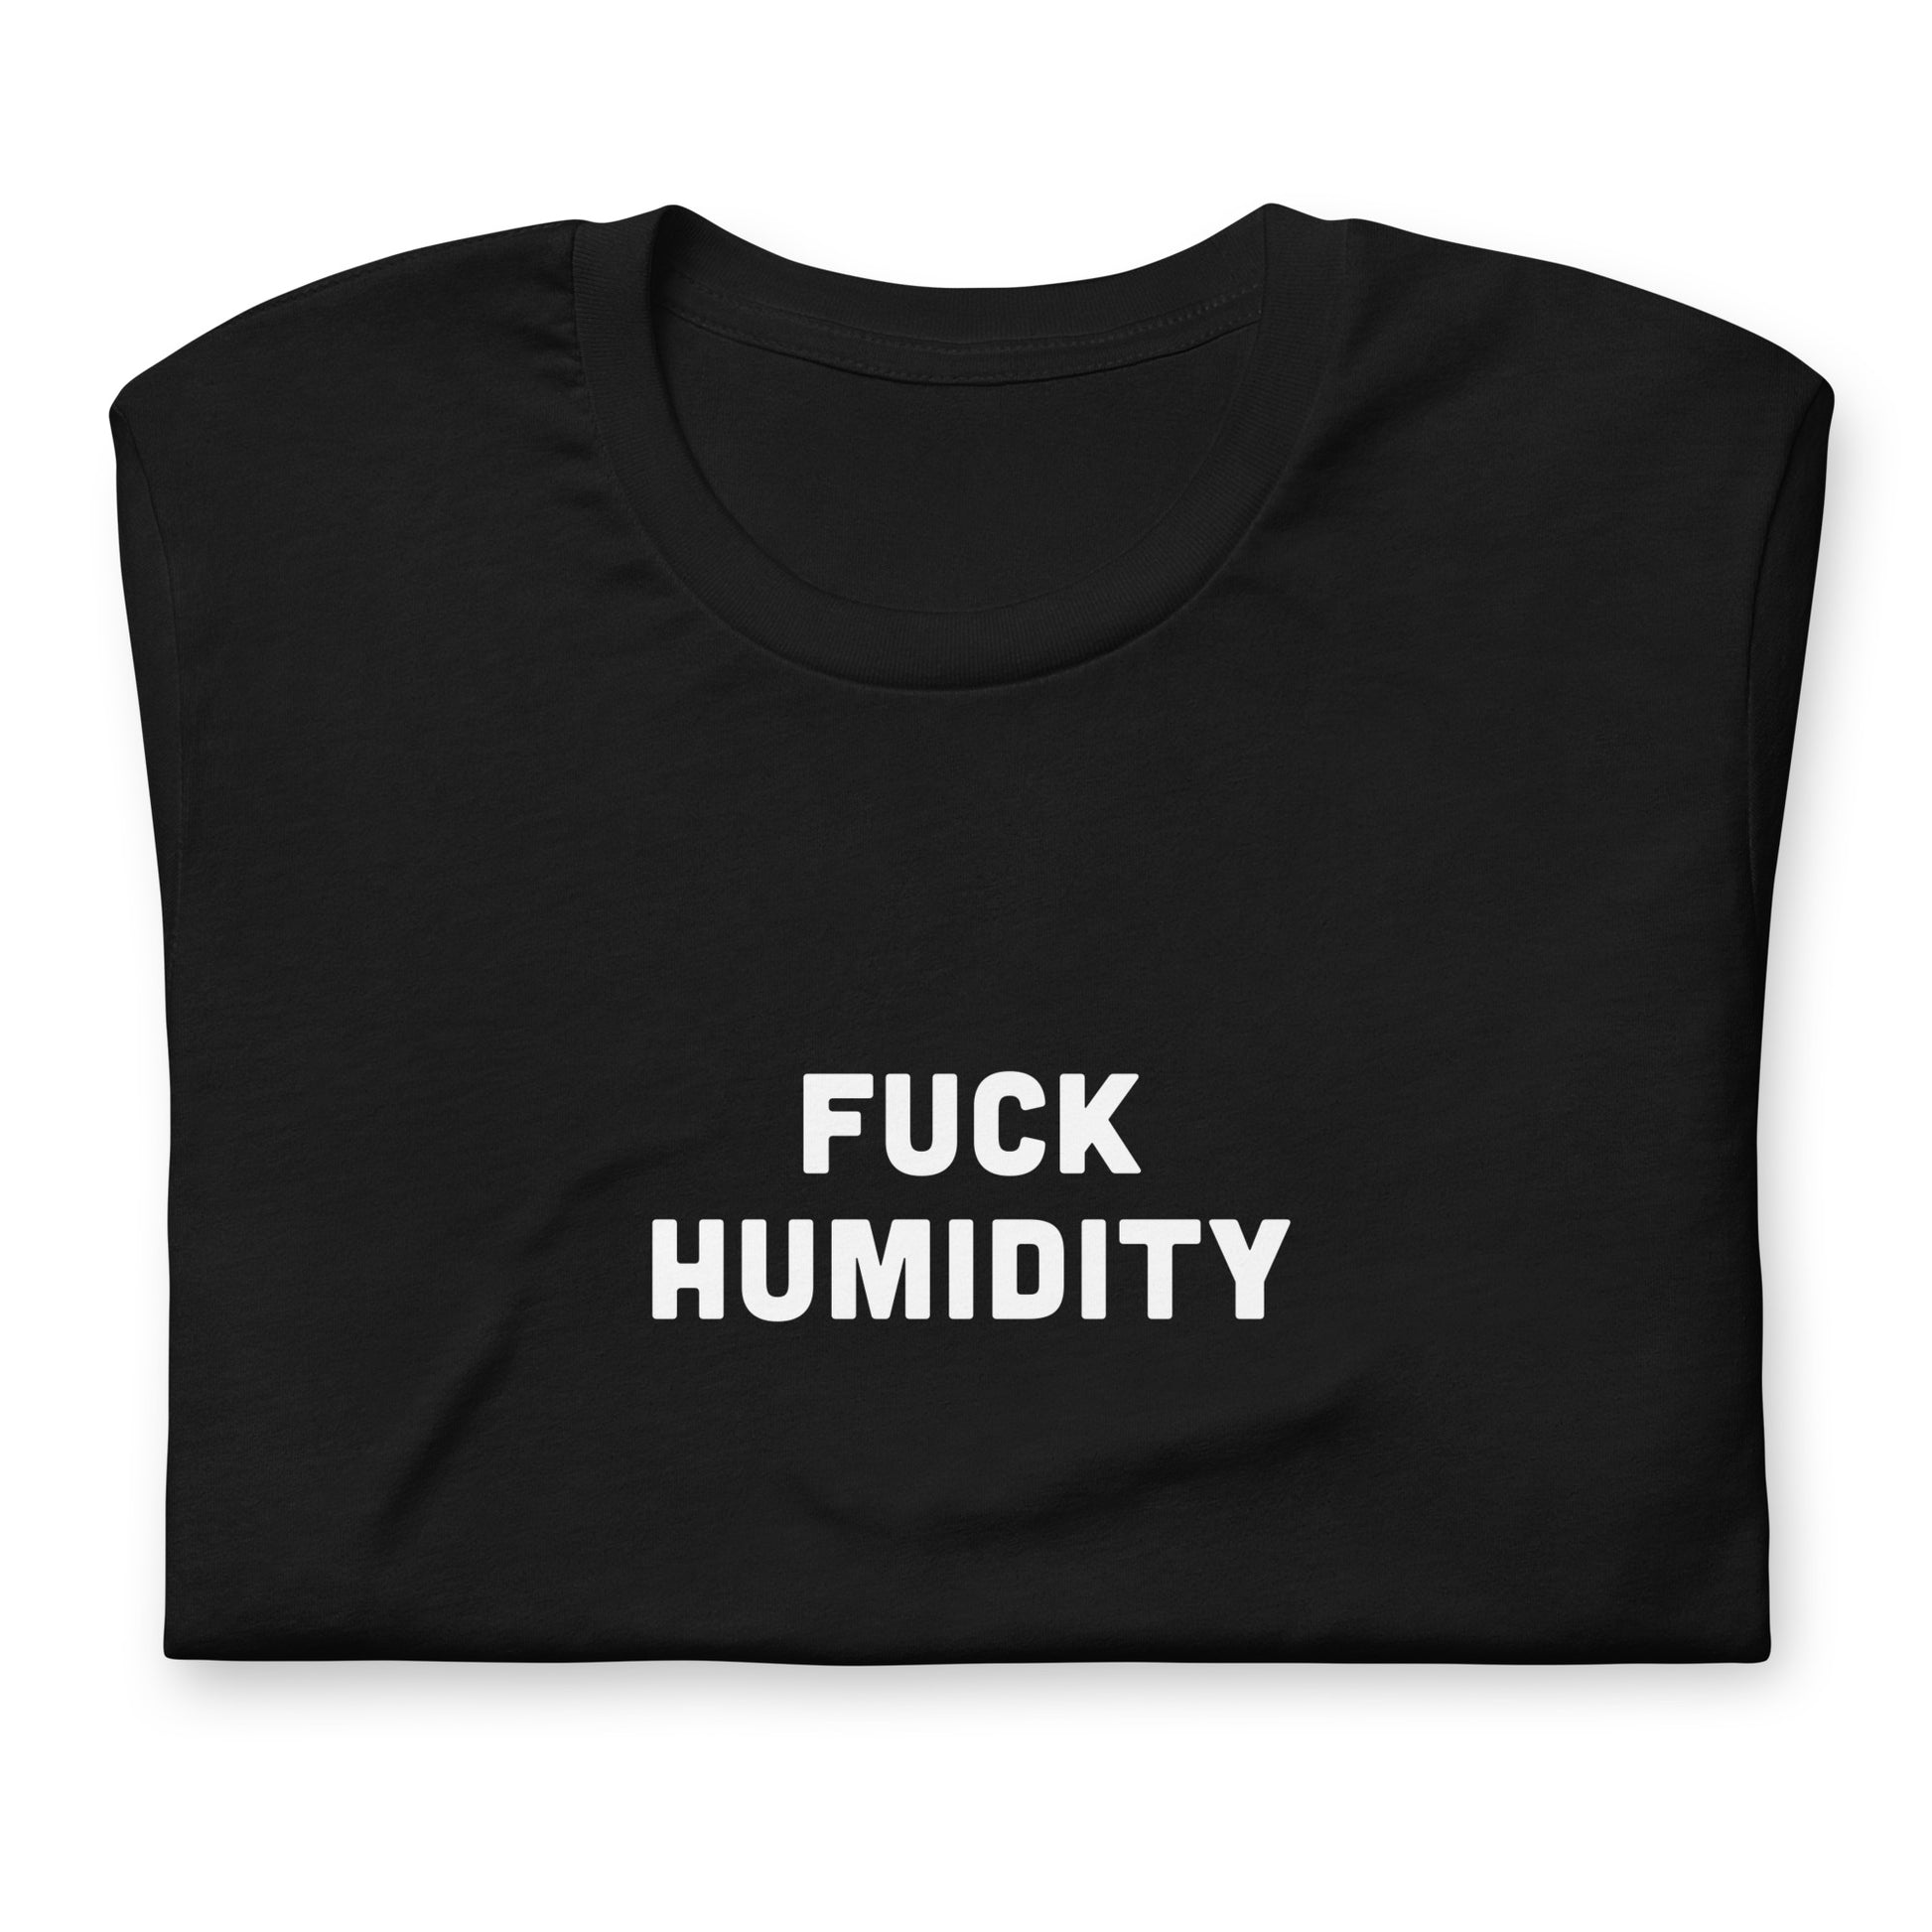 Fuck Humidity T-Shirt Size M Color Black